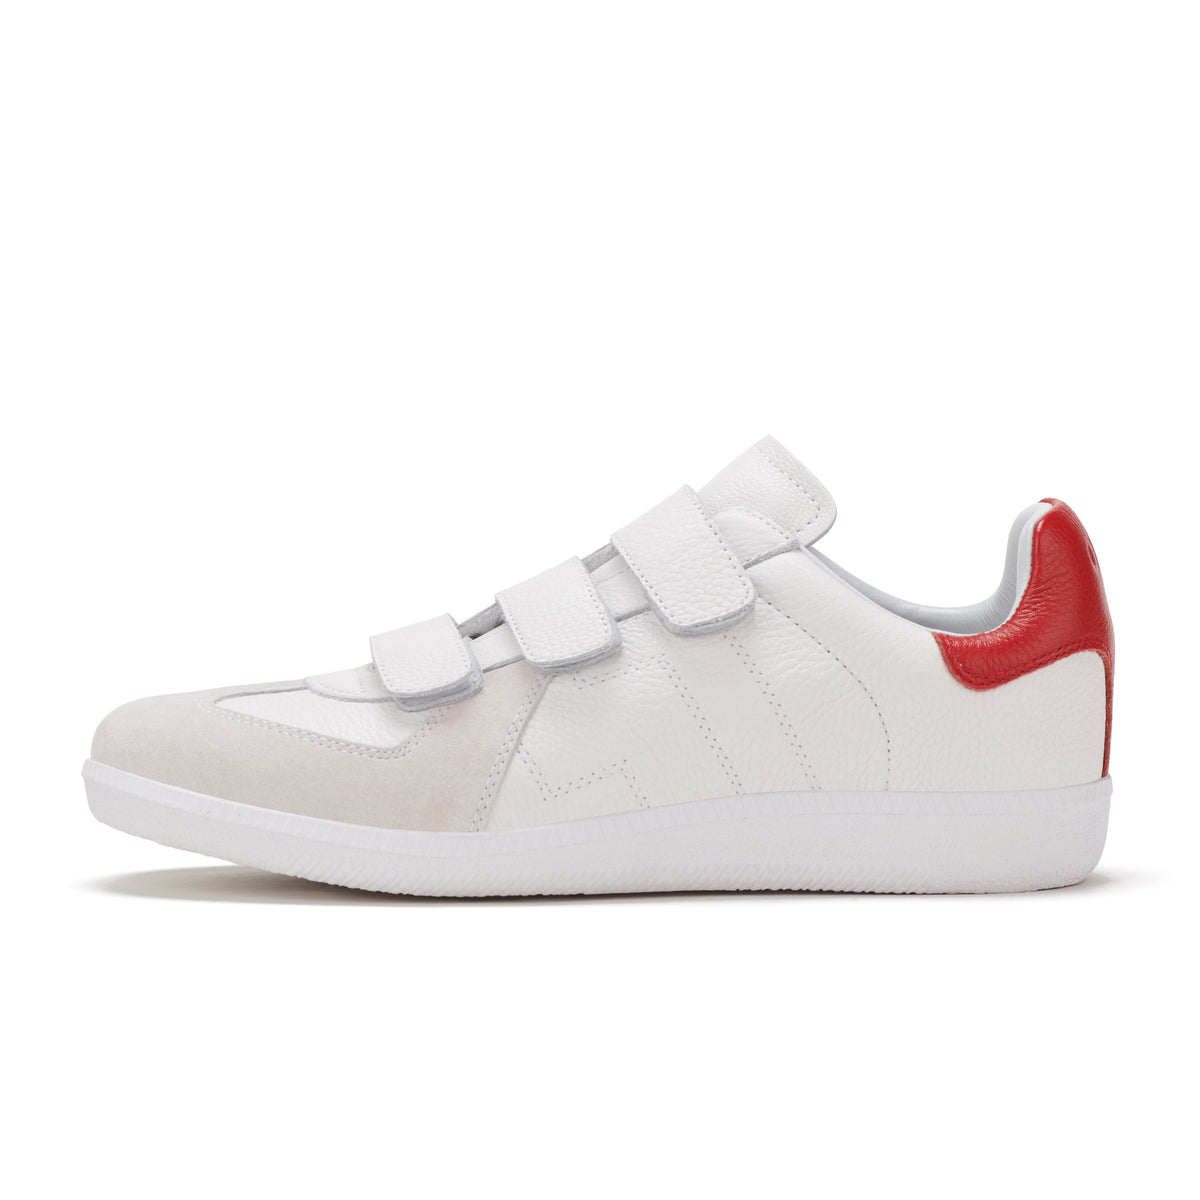 Pace Velcro Strap White/Red